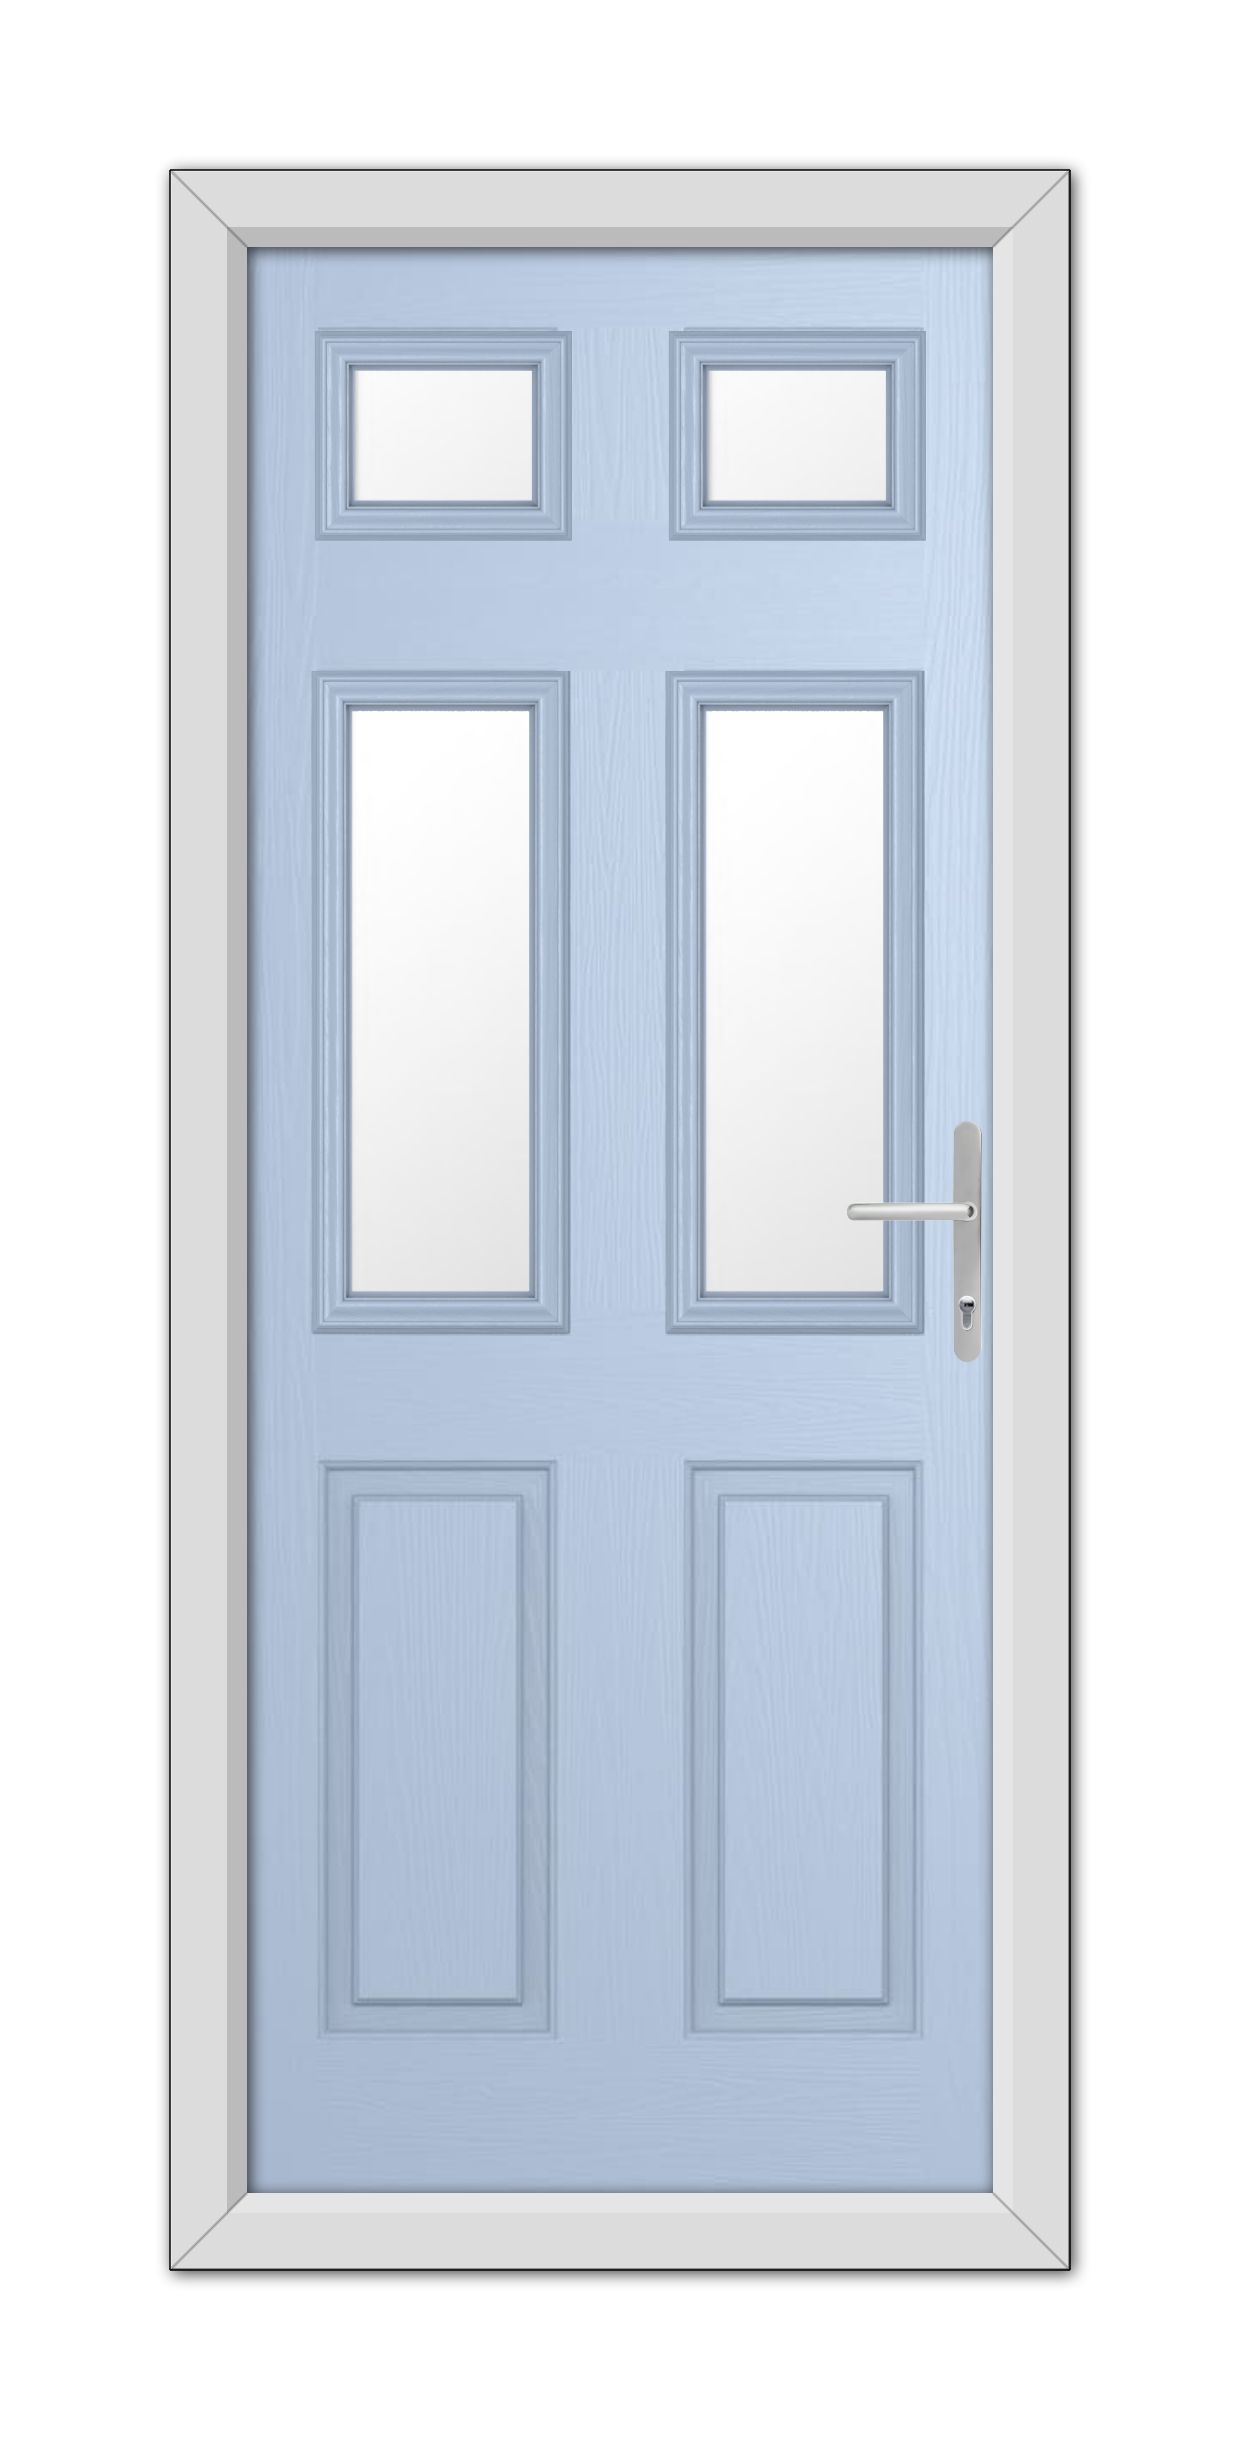 A Duck Egg Blue Middleton Glazed 4 Composite door with three rectangular frosted glass panels and a modern silver handle, set in a white frame.